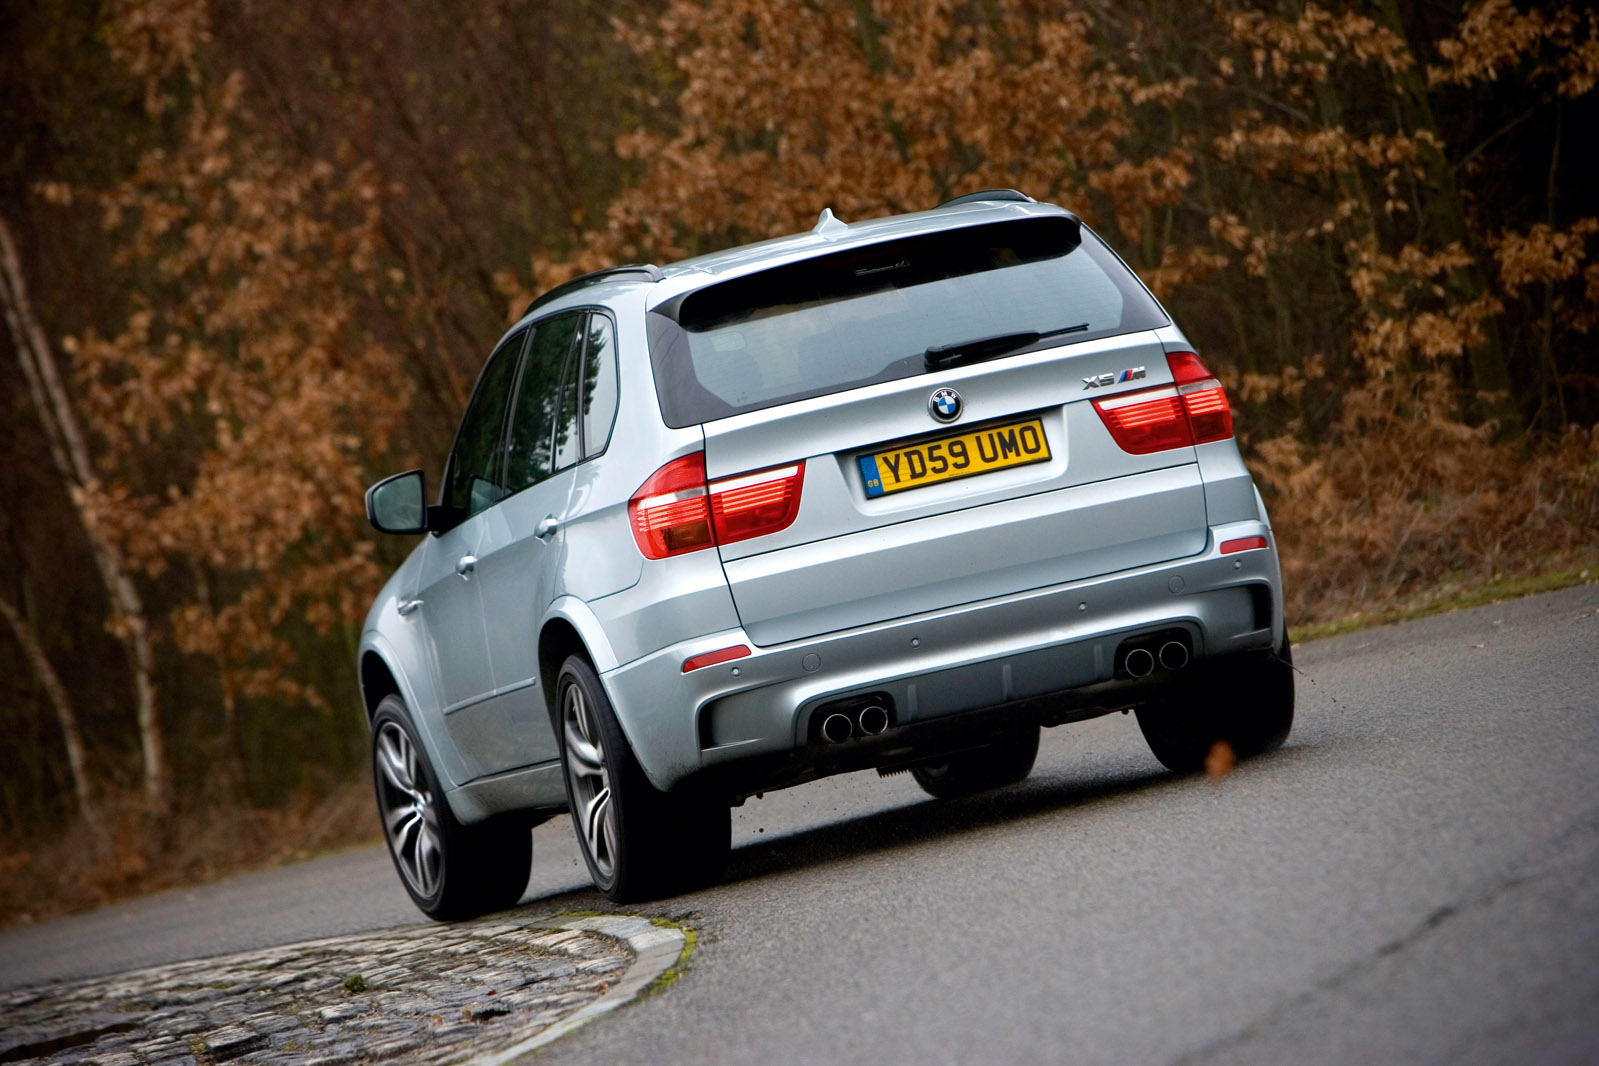 Used car buying guide: BMW X5